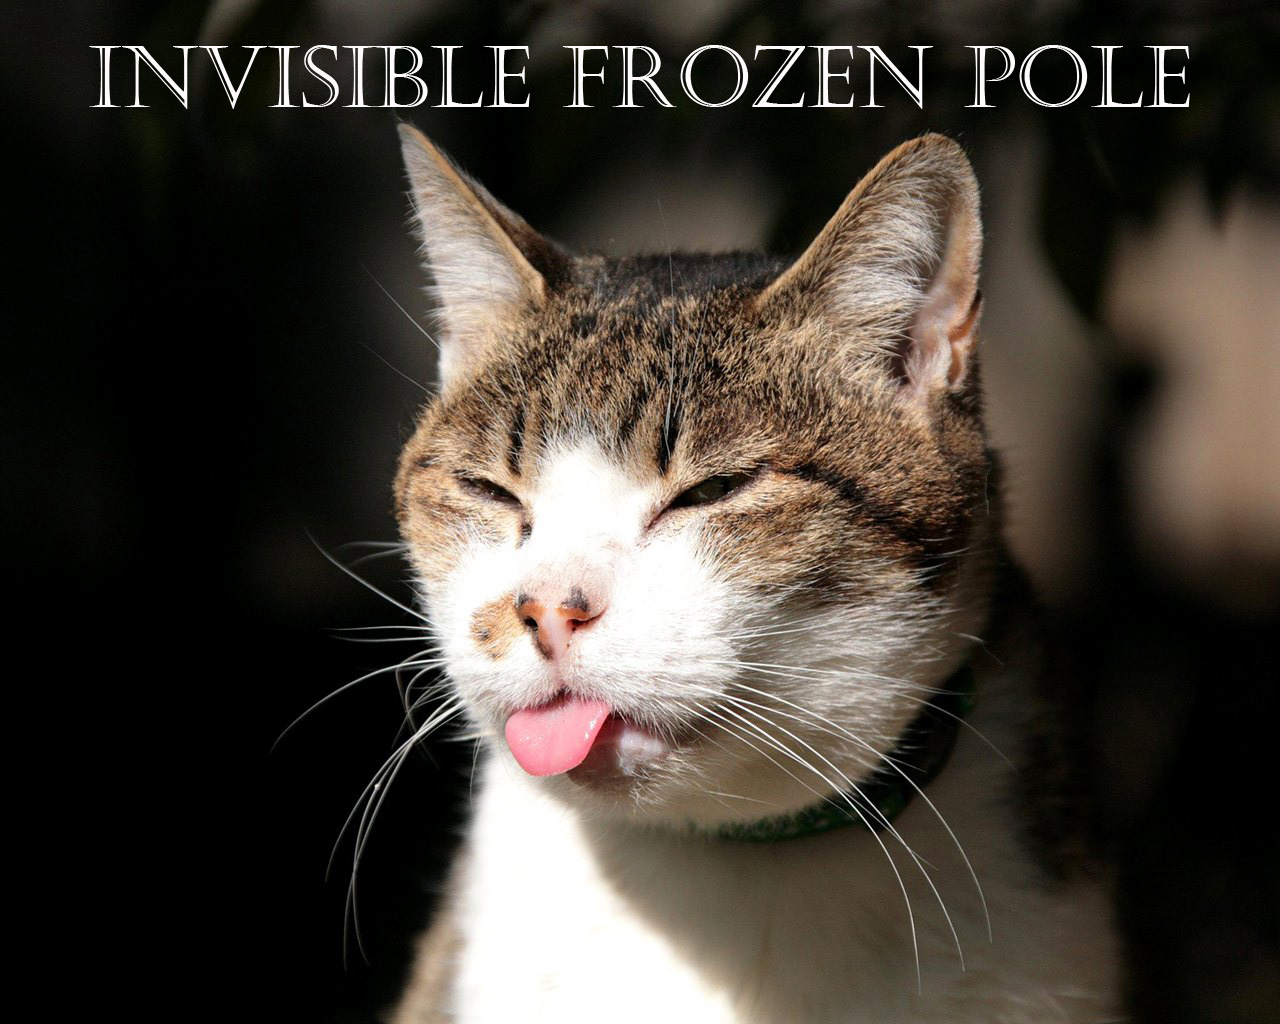 Cat has its tongue stuck to an invisible frozen pole